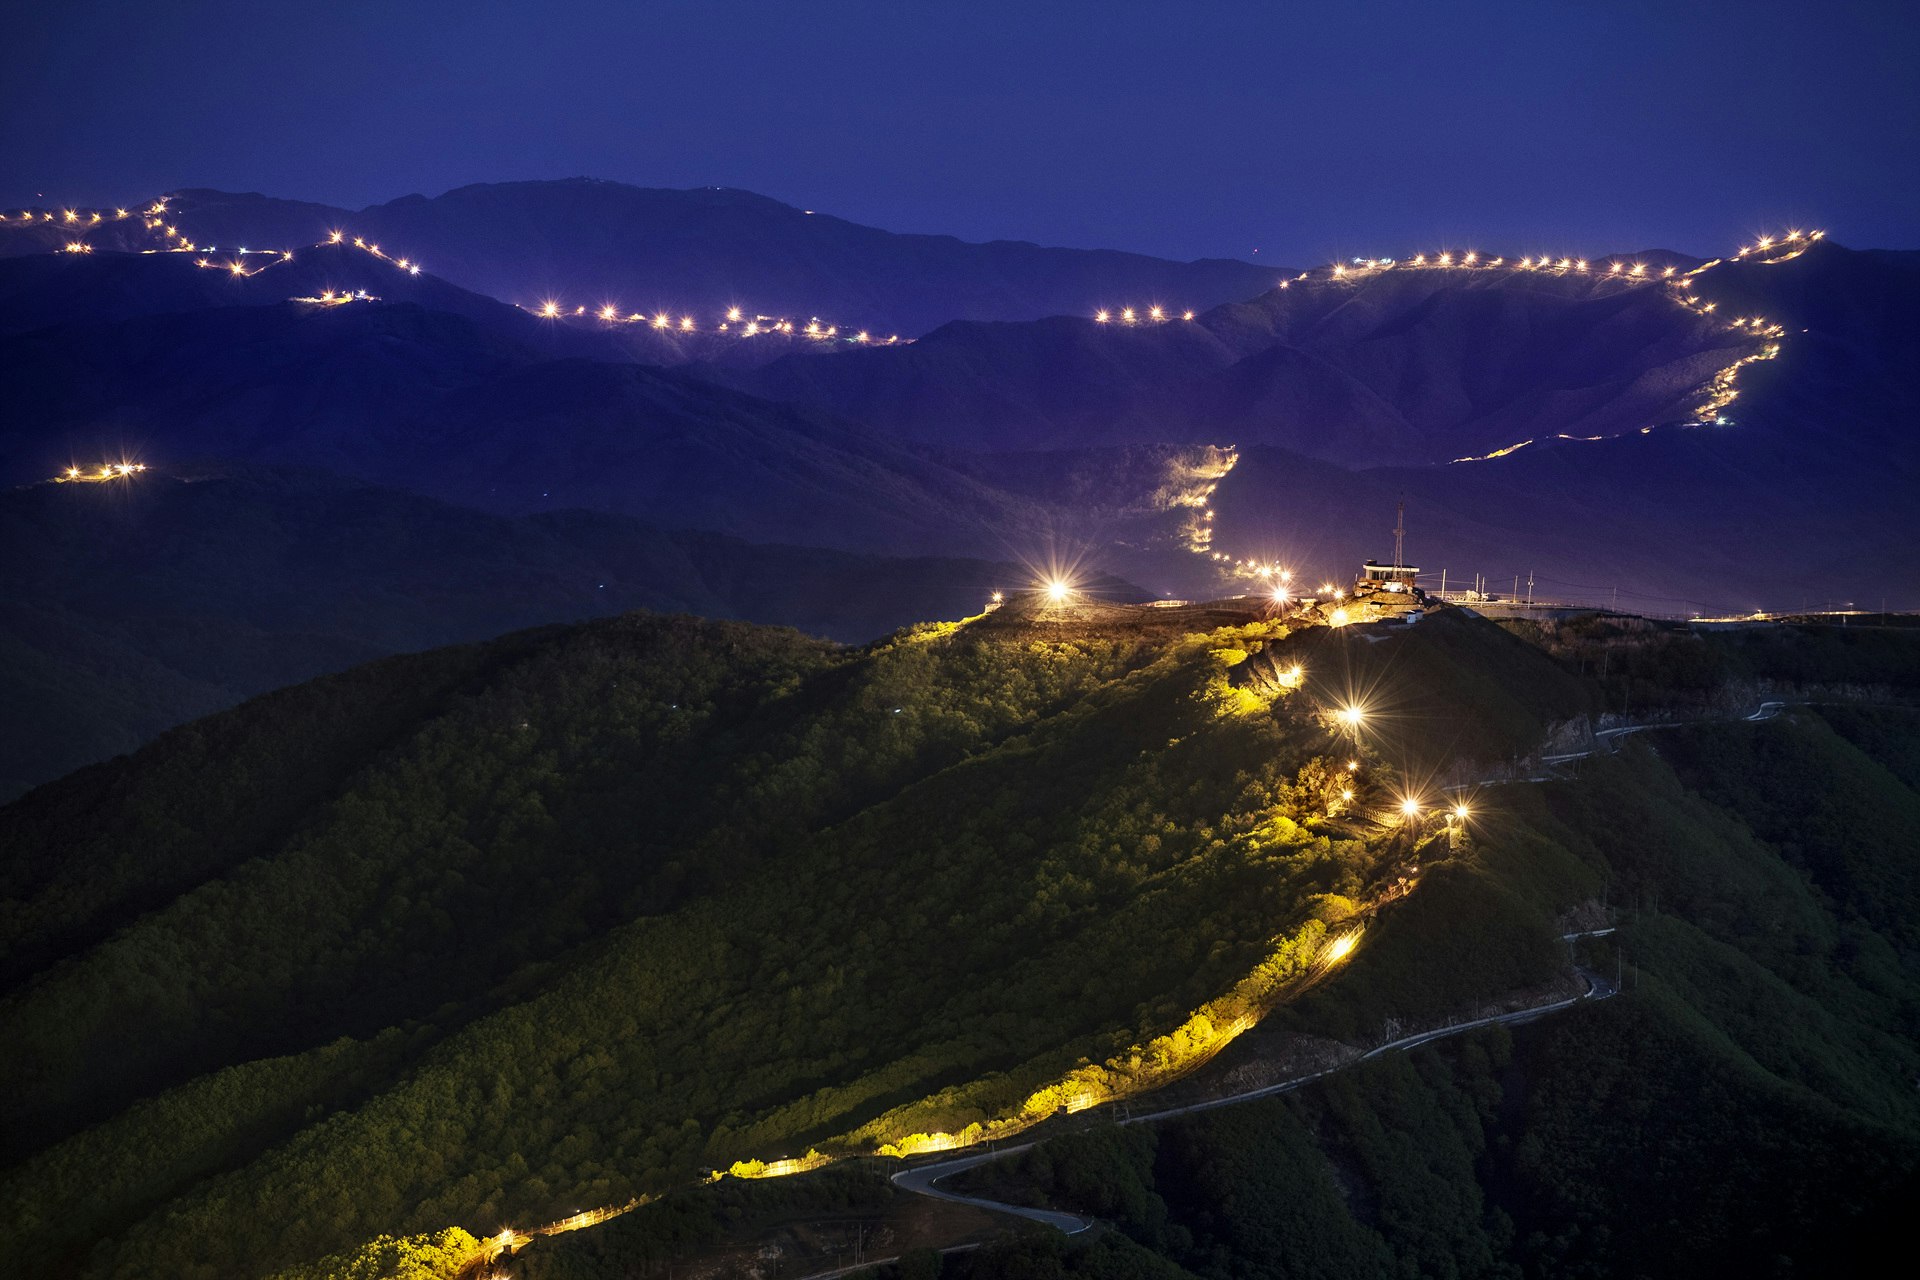 Anti-infiltration lighting illuminated along the SLL – the southern border of the DMZ at Yanggu area in the eastern part of the DMZ. The SLL traverses Korean peninsula from West to East.